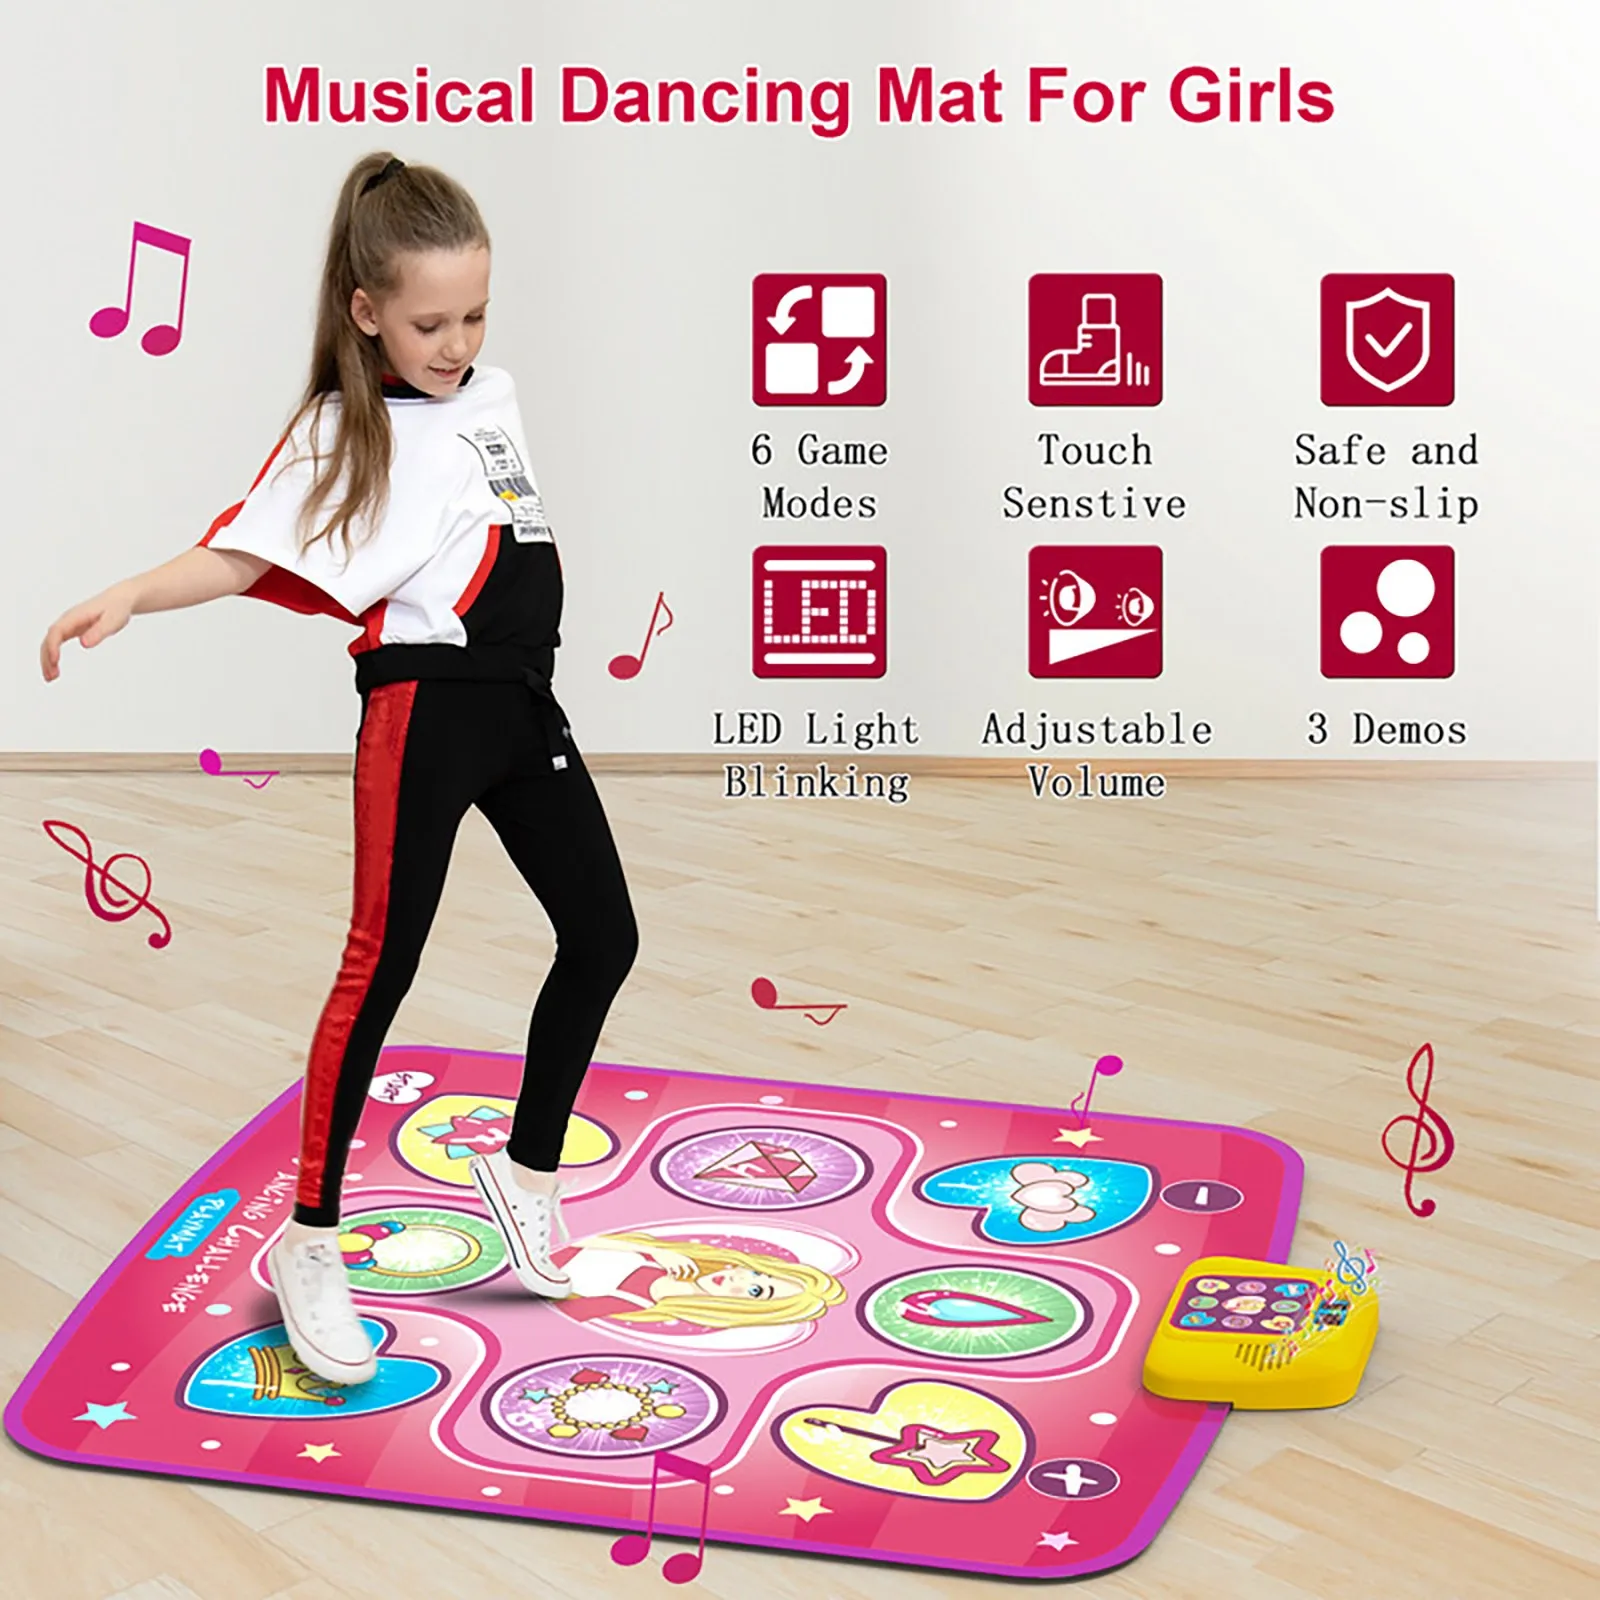 YCHWFF Dance Mat Toys for Girls Electronic Musical Play Mats Pink Dance Pad Non-Slip Dancing Floor Mat Game Toy with 5 Game Modes Christmas Birthday Gifts for 3 ~ 10 Year Old Girls Toys 